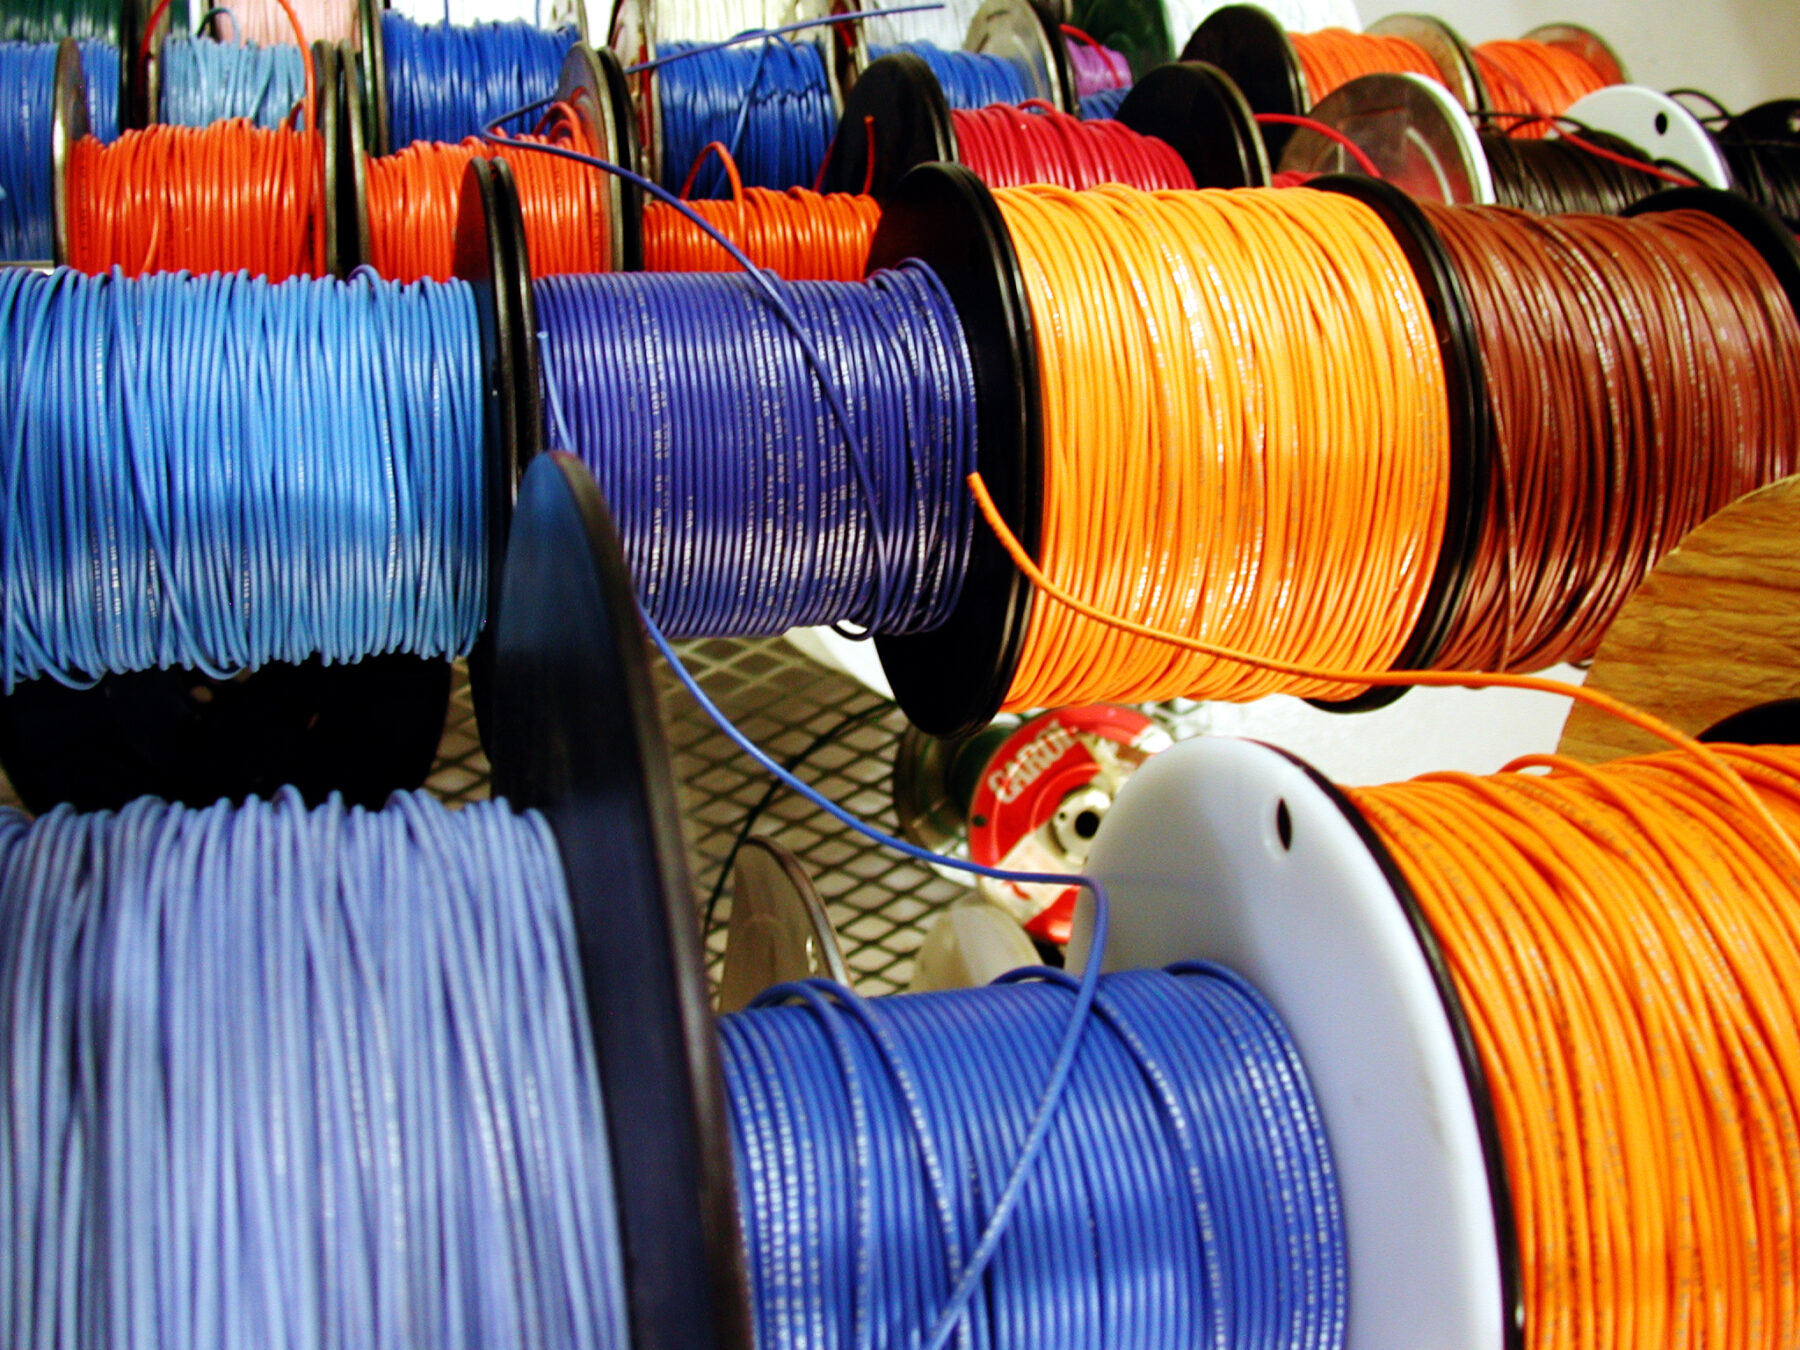 Supplier of Custom Cables in Houston Texas